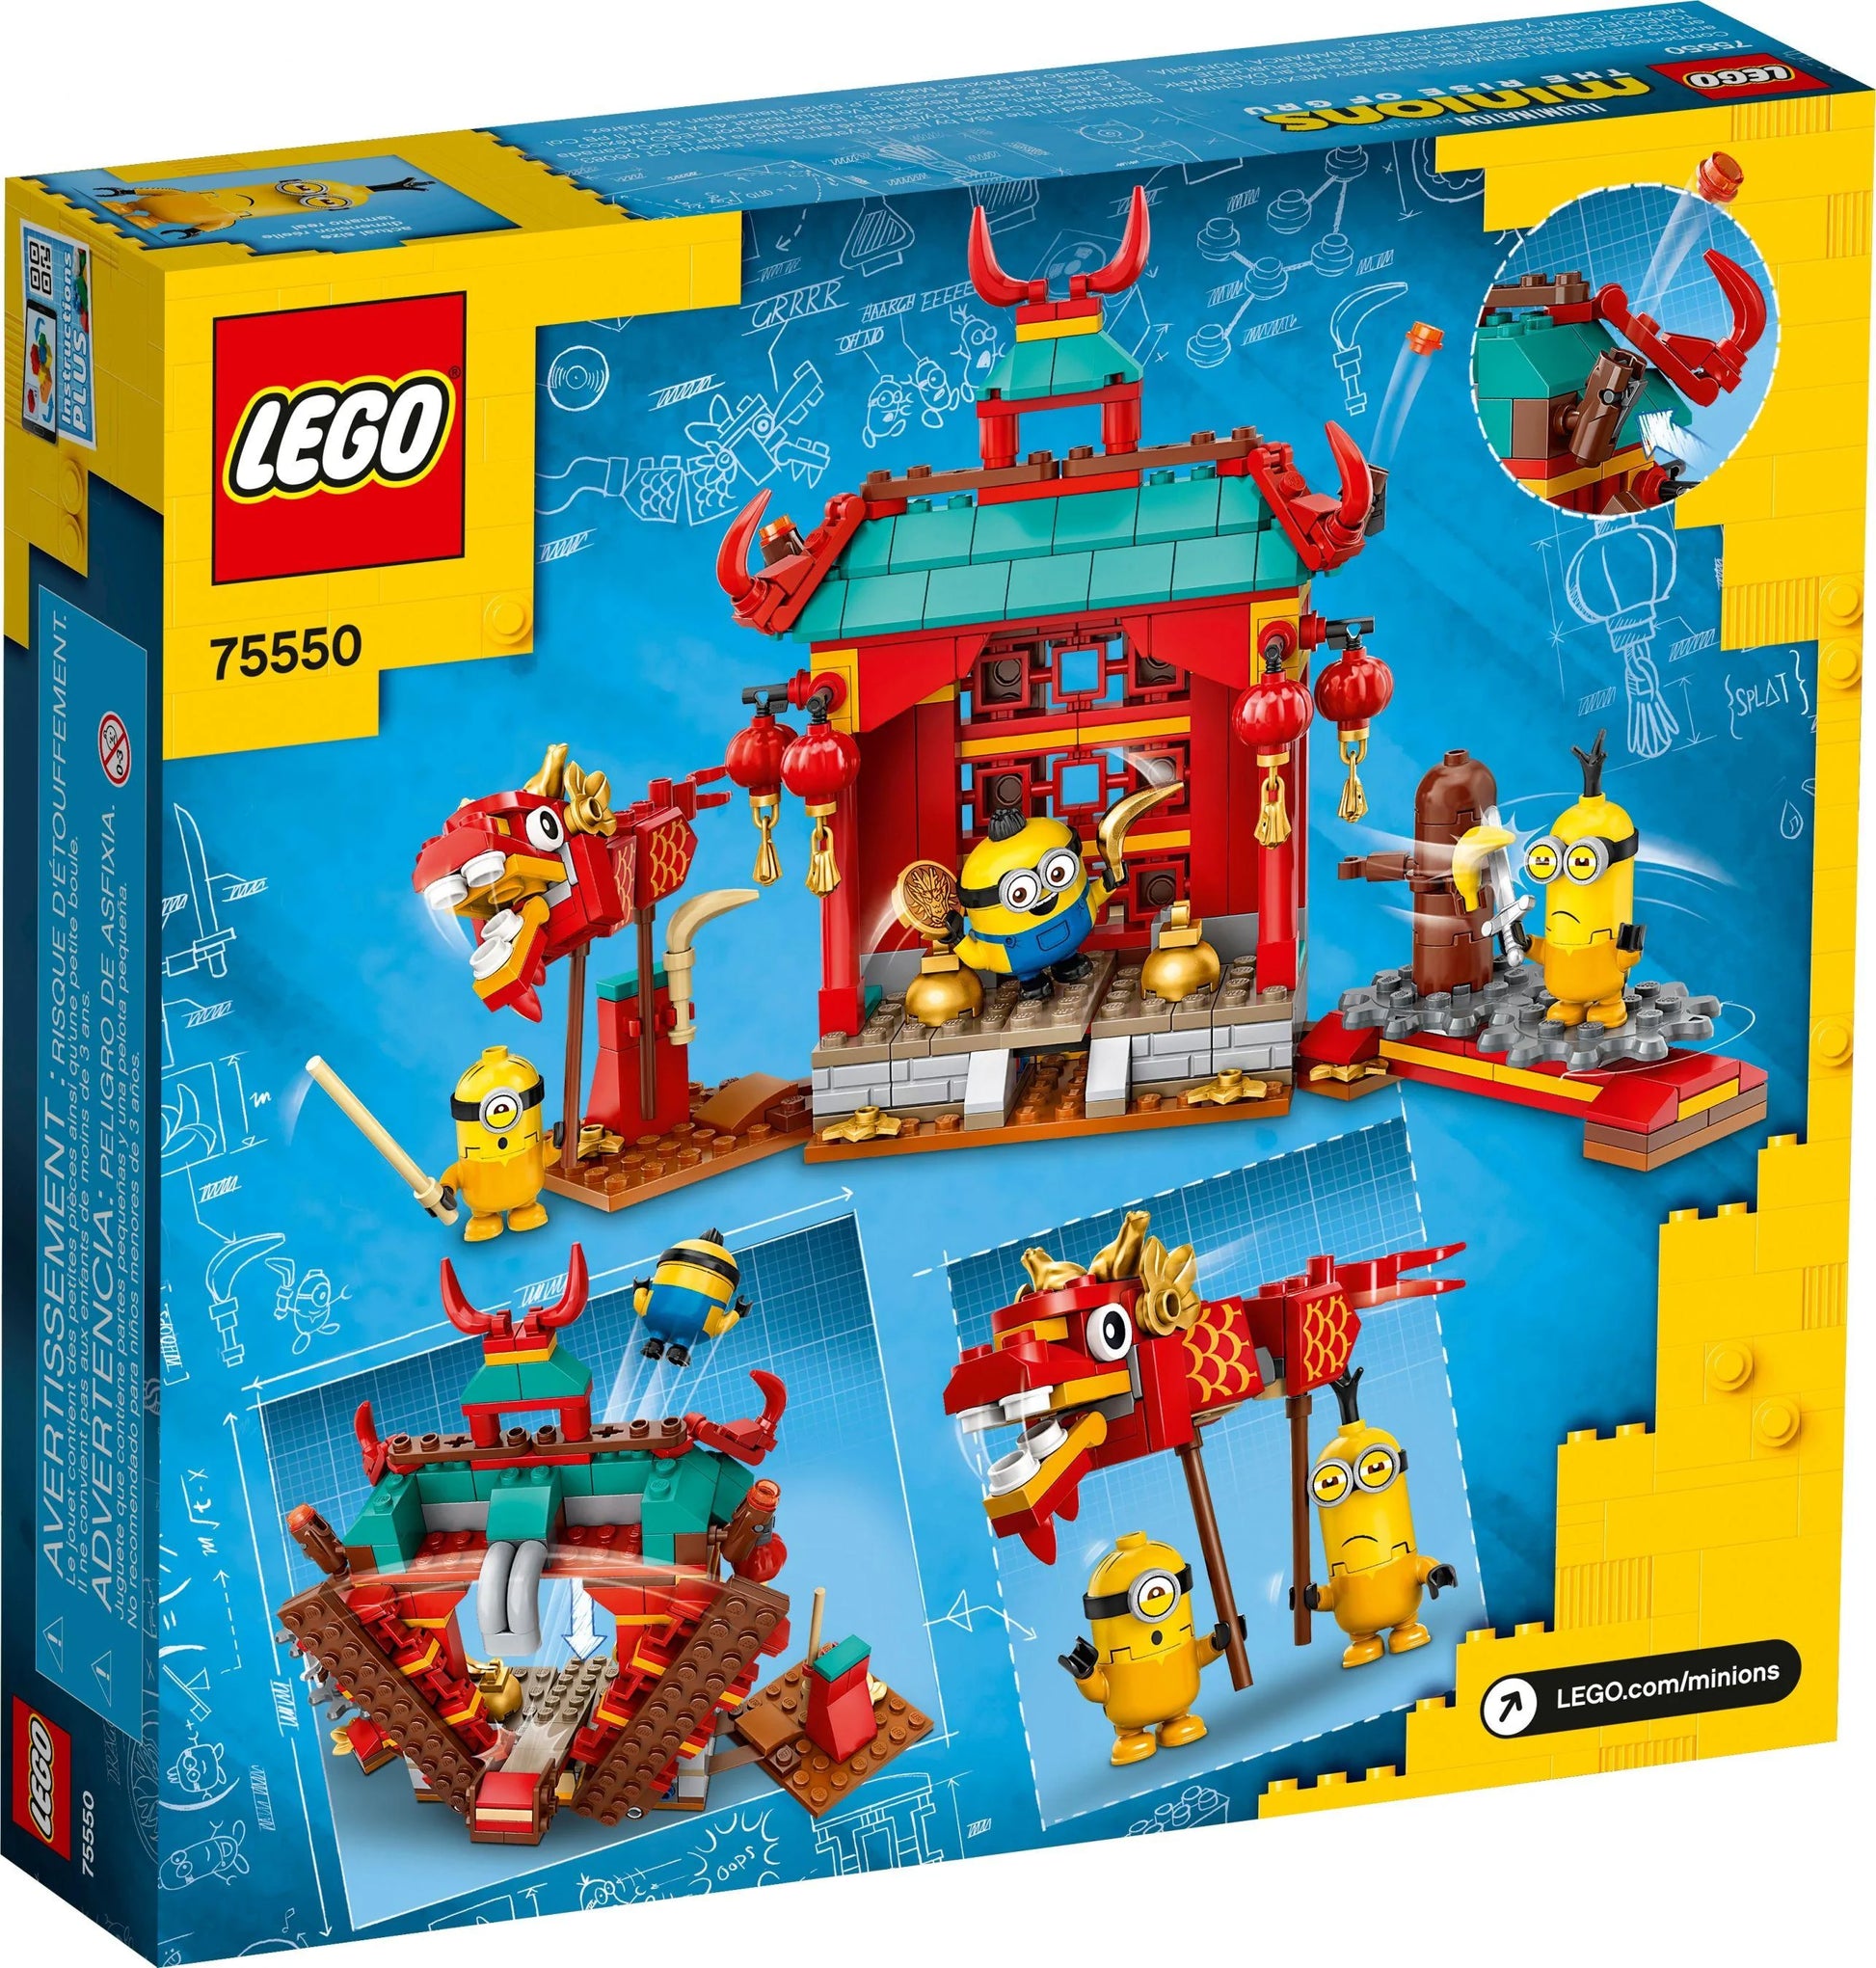 LEGO® Minions: The Rise of Gru 75550 Minions Kung Fu Tempel - 310 Teile - Peer Online Shop